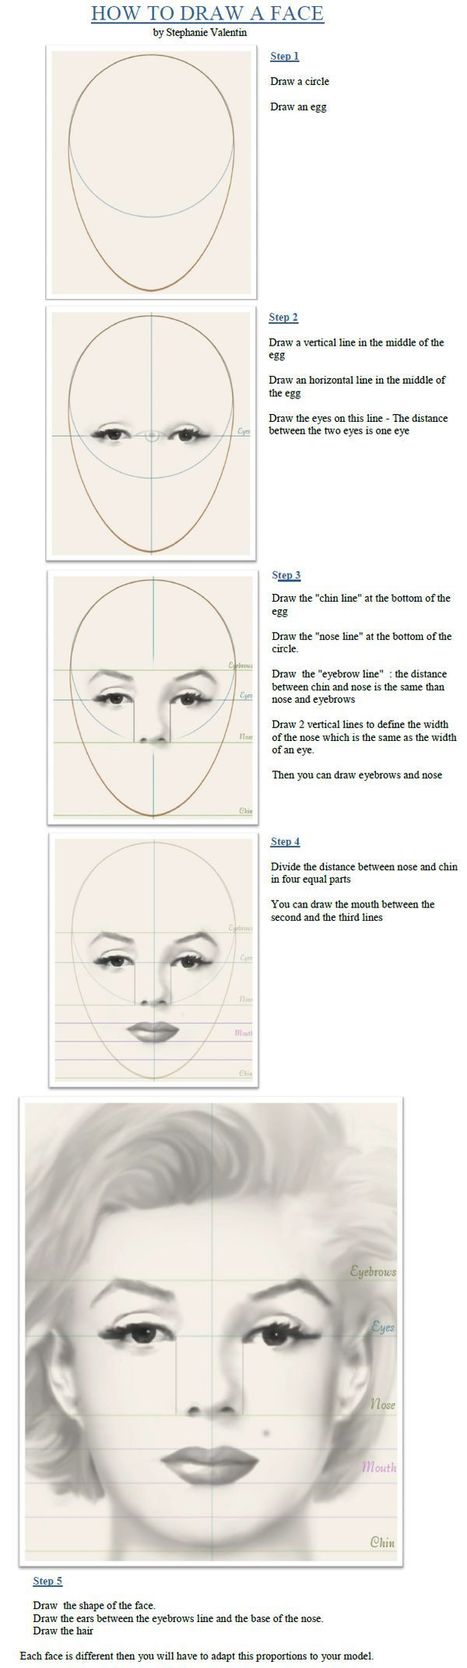 Face Drawing Reference Guide | Drawing References and Resources | Scoop.it